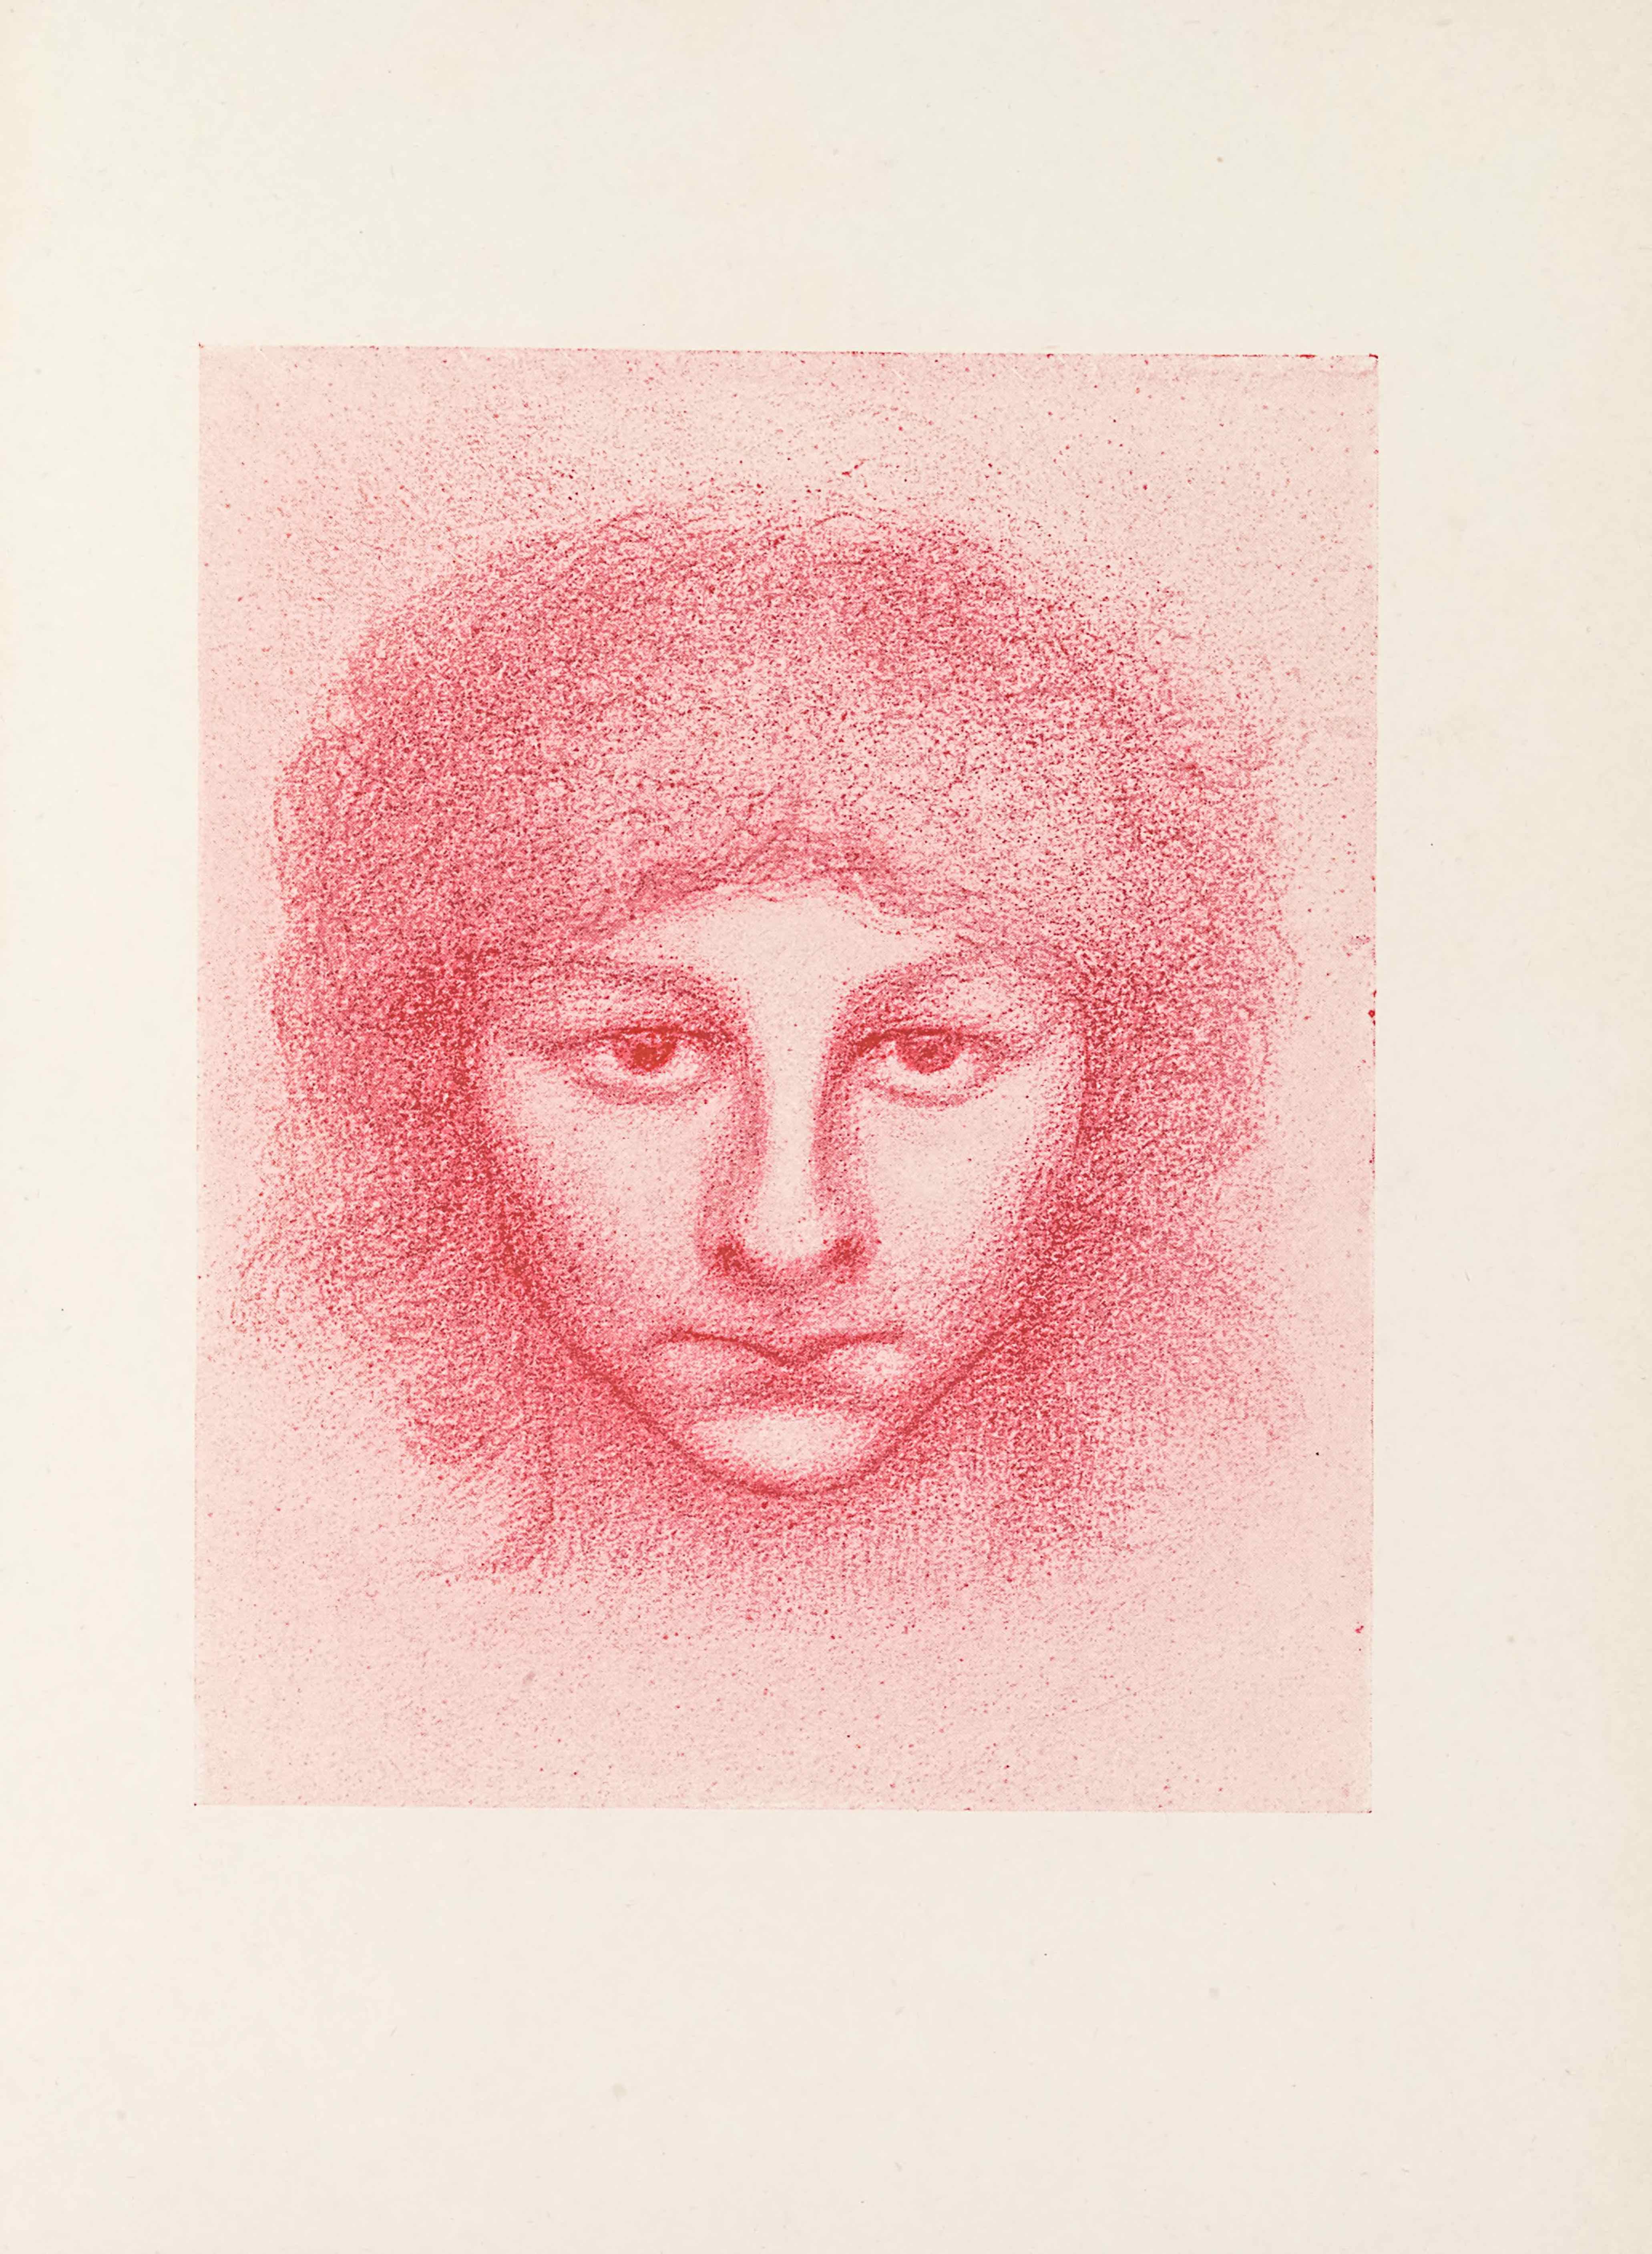 This half-tone reproduction of a crayon drawing printed in red ink is in portrait orientation. The drawing of a head floats in a plain background. The head takes up the whole central area of the image, leaving only a little space on each side and a little more above and below. The head is facing the viewer straight on, with a slight tilt of the chin downwards. The face is round with a slightly squared chin. There is a mouth depicted in a tight line. The nose takes up a large portion of the face, and the eyes are proportionately large as well. The irises are positioned at the top of the eyeball, as a result of the chin being pointed down slightly. The brows angle up towards the sides of the face in a straight line. Frizzy, curly hair falls down on the face in bangs to the mid-forehead and temples. The hair also falls around the sides of the face, creating a puffy cushioning of hair around the head. There is brief shading below the chin to indicate the start of a neck. The image is drawn in a burnt orange-red colour (“sanguine”) on a pale background.